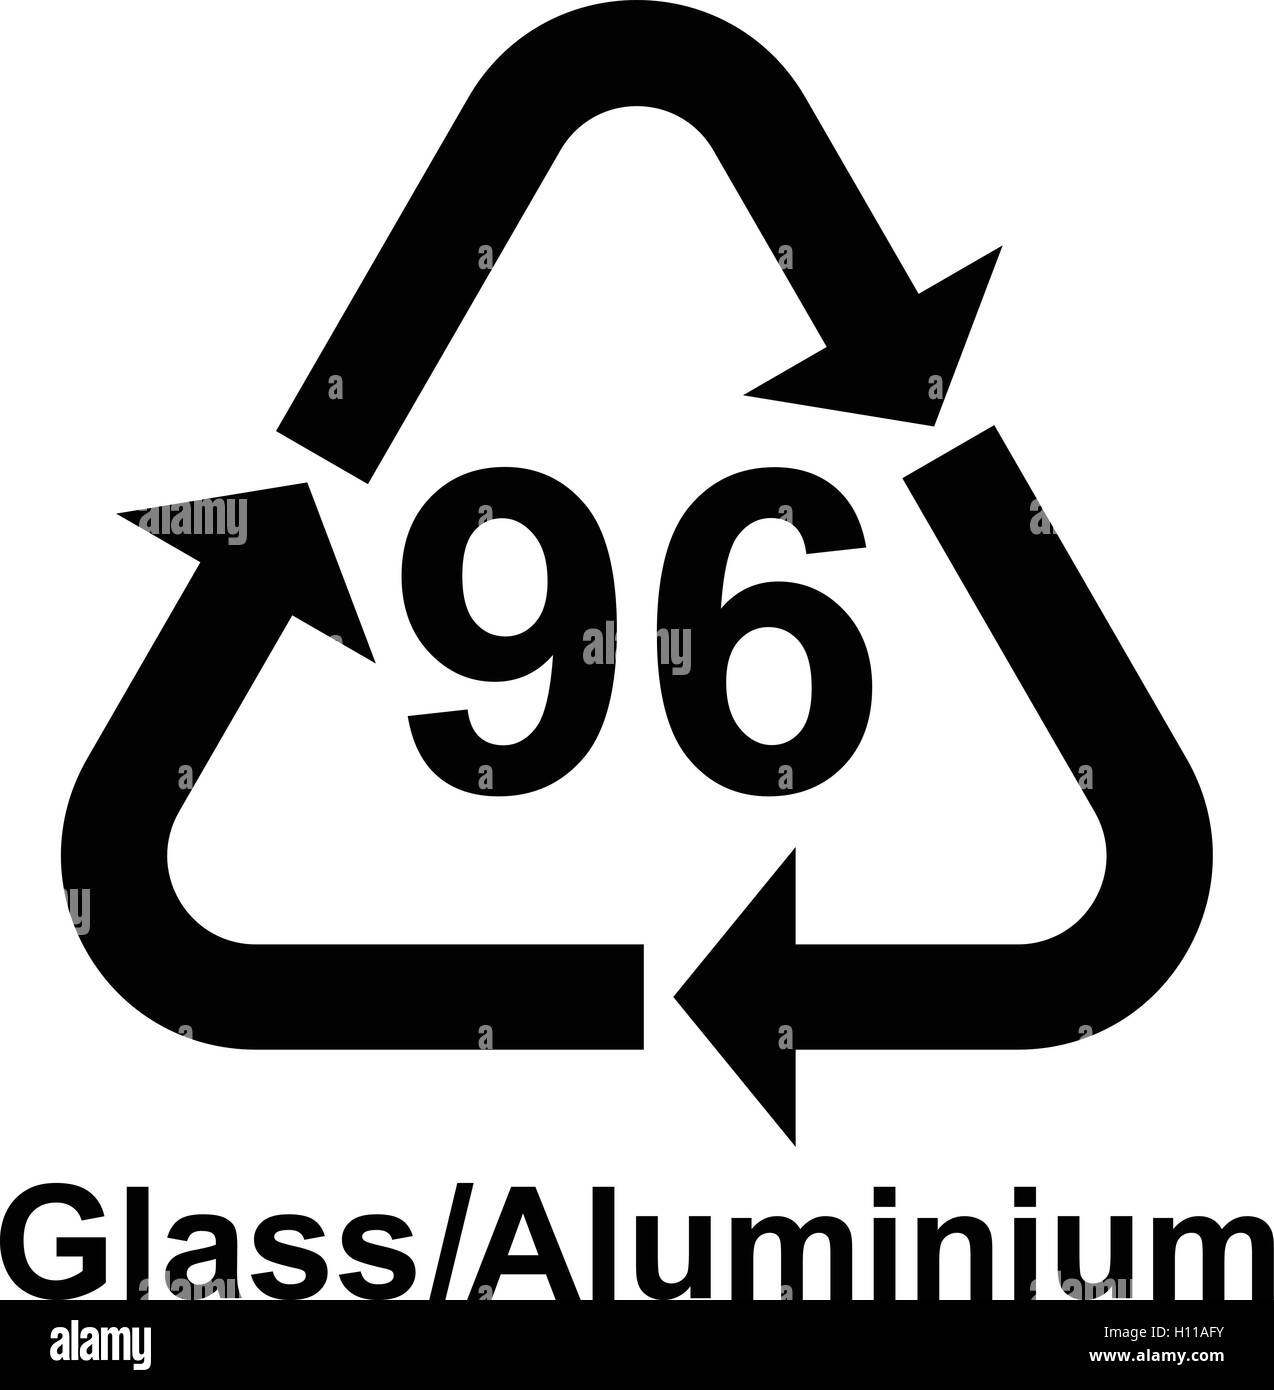 Composites recycling Symbol 96. Composites recycling Code 96, Vector Illustration. Stock Vektor